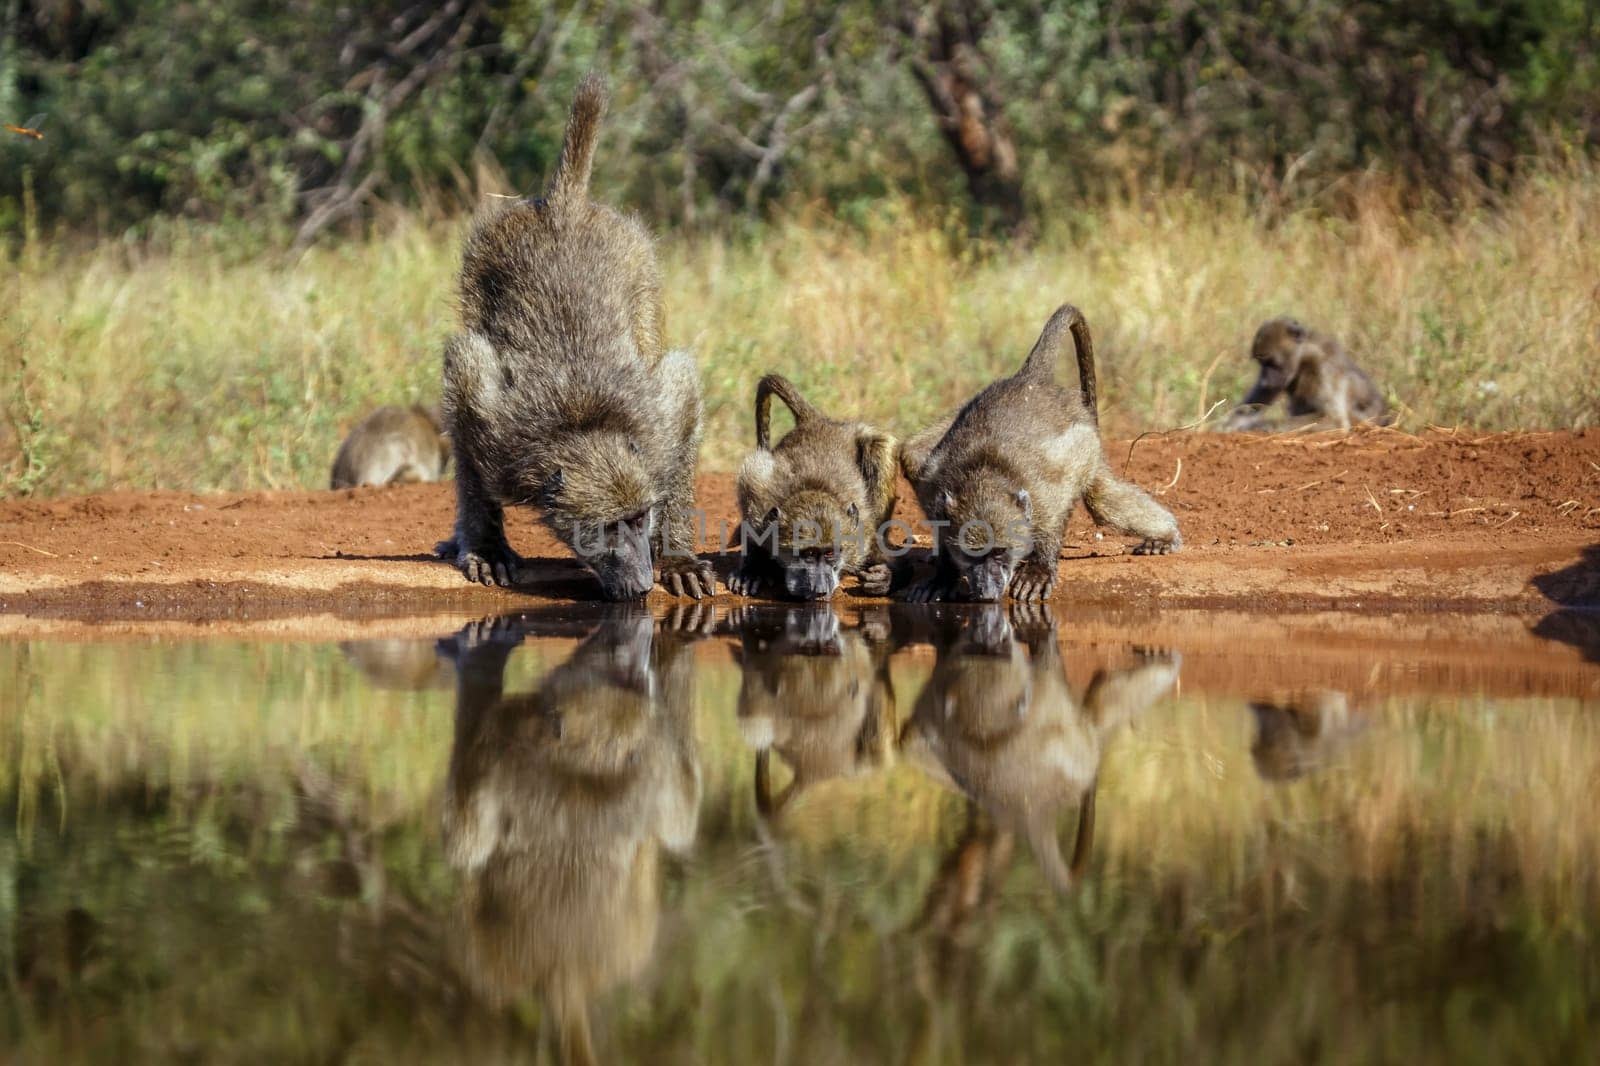 Chacma baboon family drinking in waterhole in Kruger National park, South Africa ; Specie Papio ursinus family of Cercopithecidae